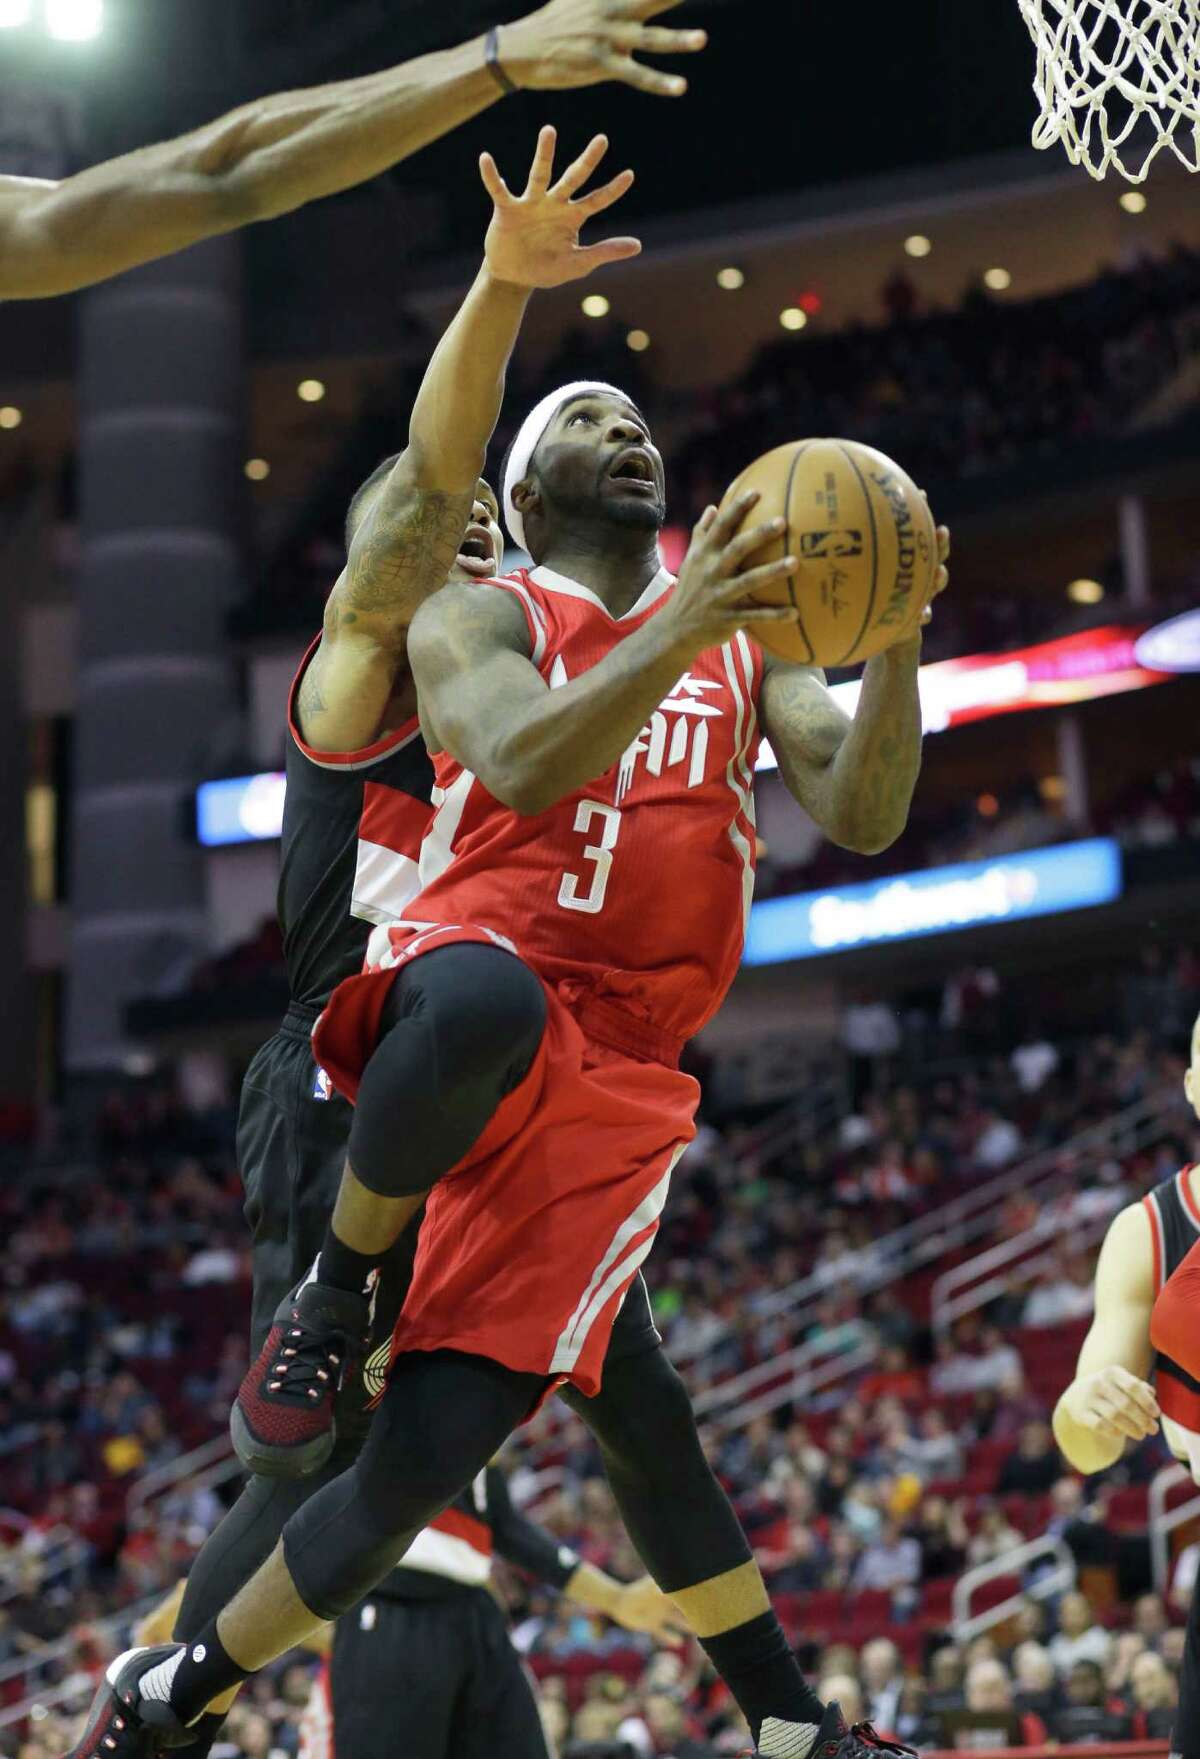 Guard Ty Lawson and the Rockets faced an uphill climb for most of the night against the Trail Blazers.